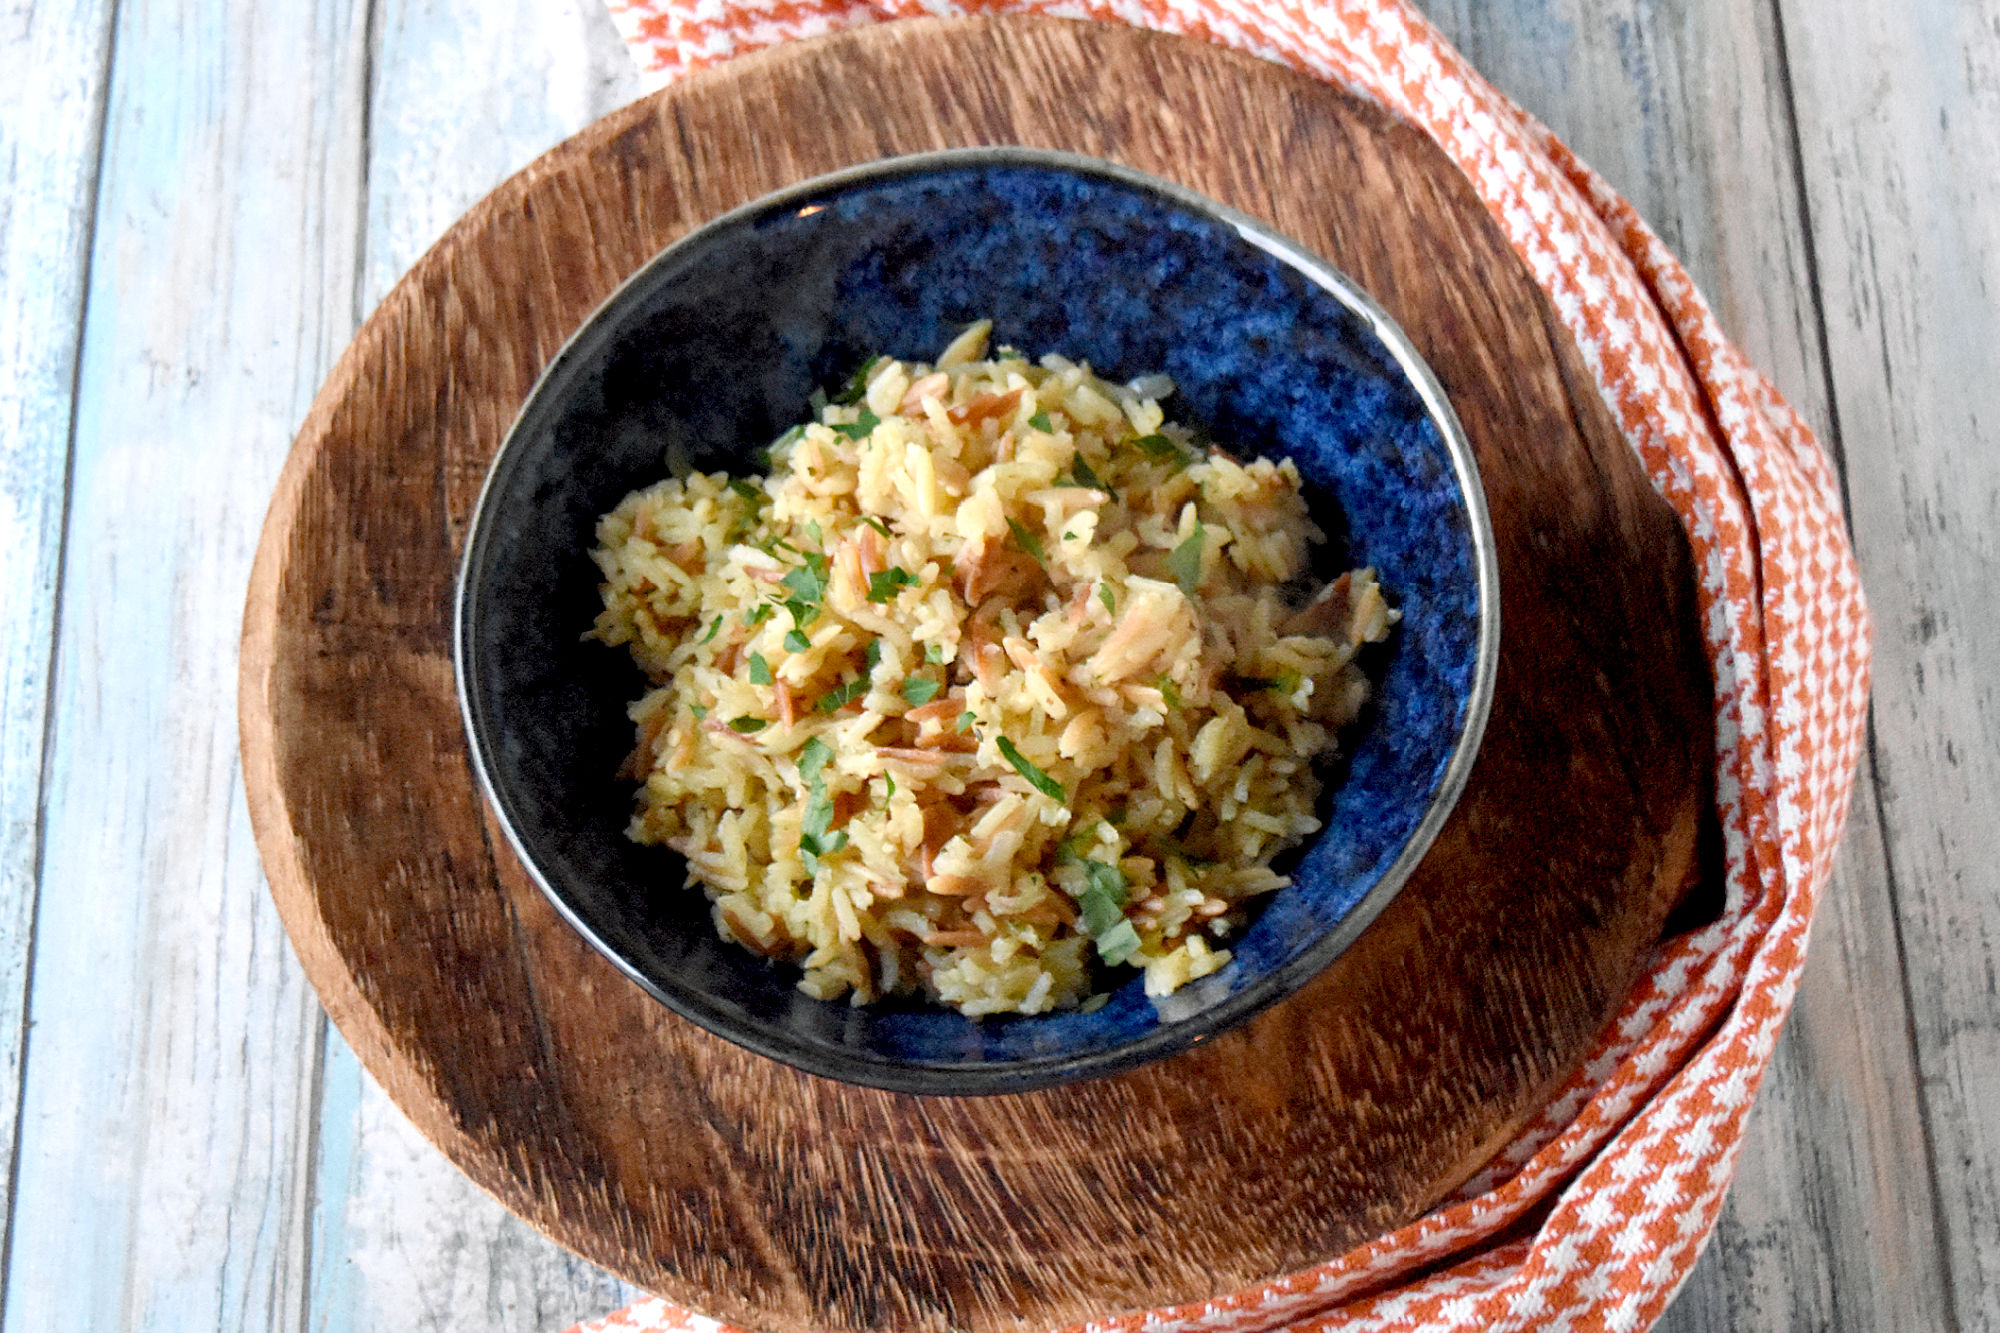 Skip the boxed mix and make Homemade Rice Pilaf at home. With some simple pantry ingredients, the sky, and your imagination, is the limit with all the ways you can customize this simple recipe. #ComfortFood #OurFamilyTable #ricepilaf #betterthanboxedrice #homemaderice #ricesidedish #HomeCooked #RicePilafLove
